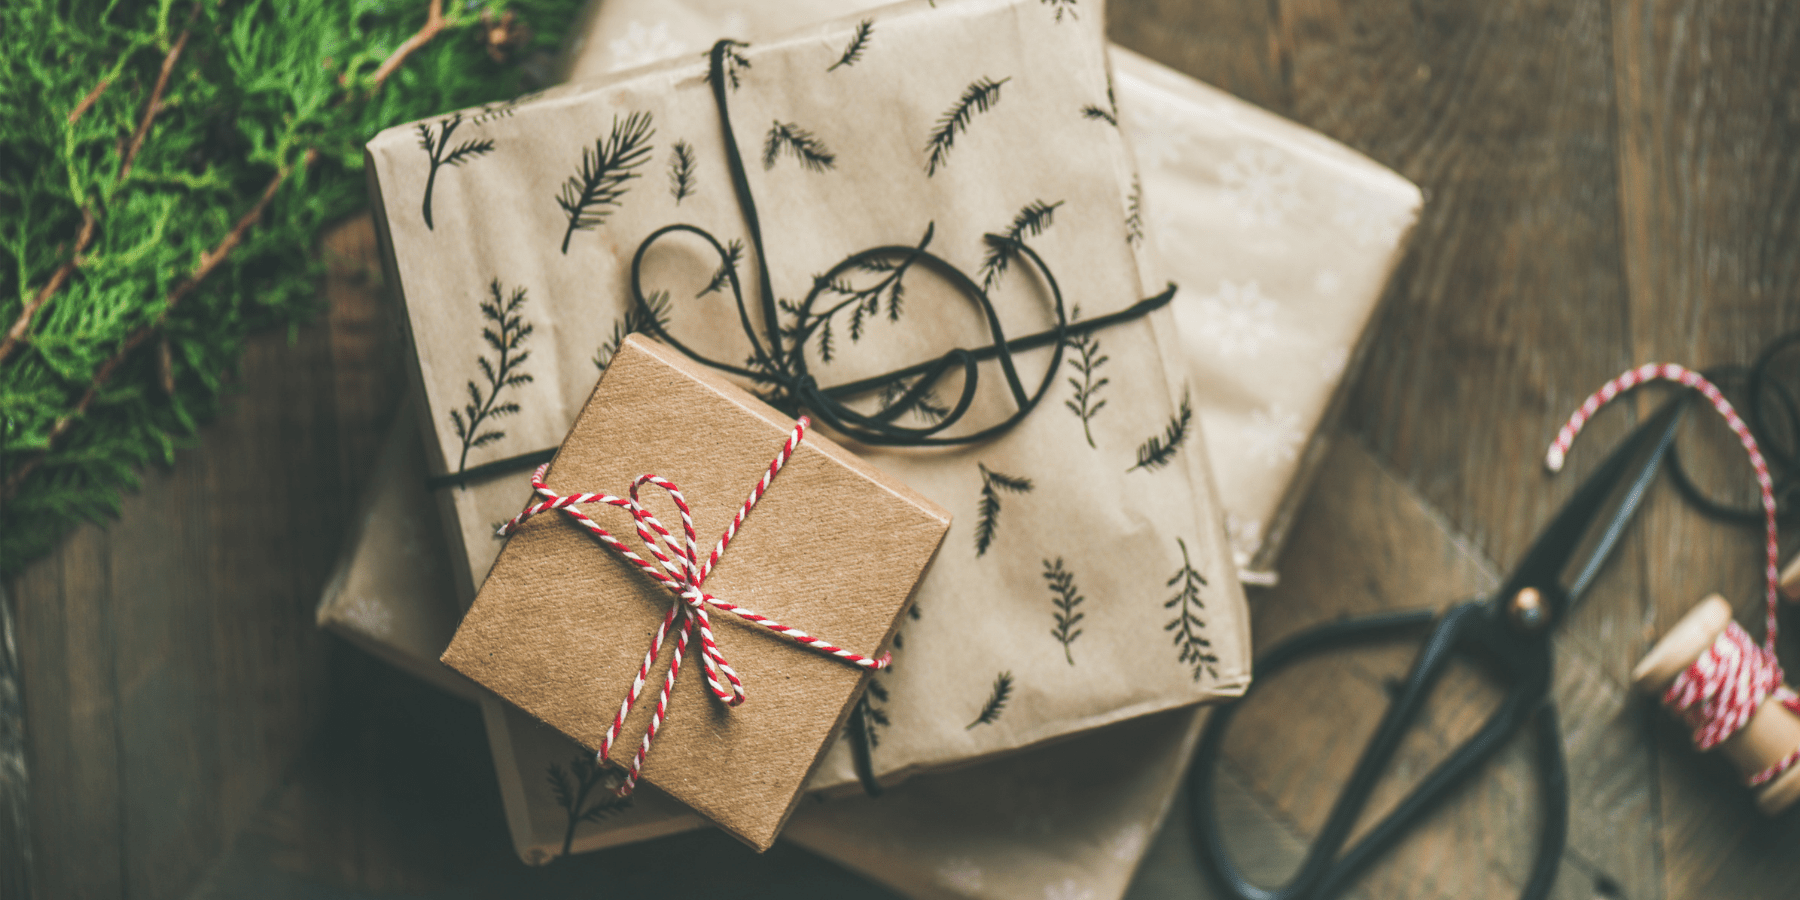 Presents wrapped in eco-friendly wrapping paper